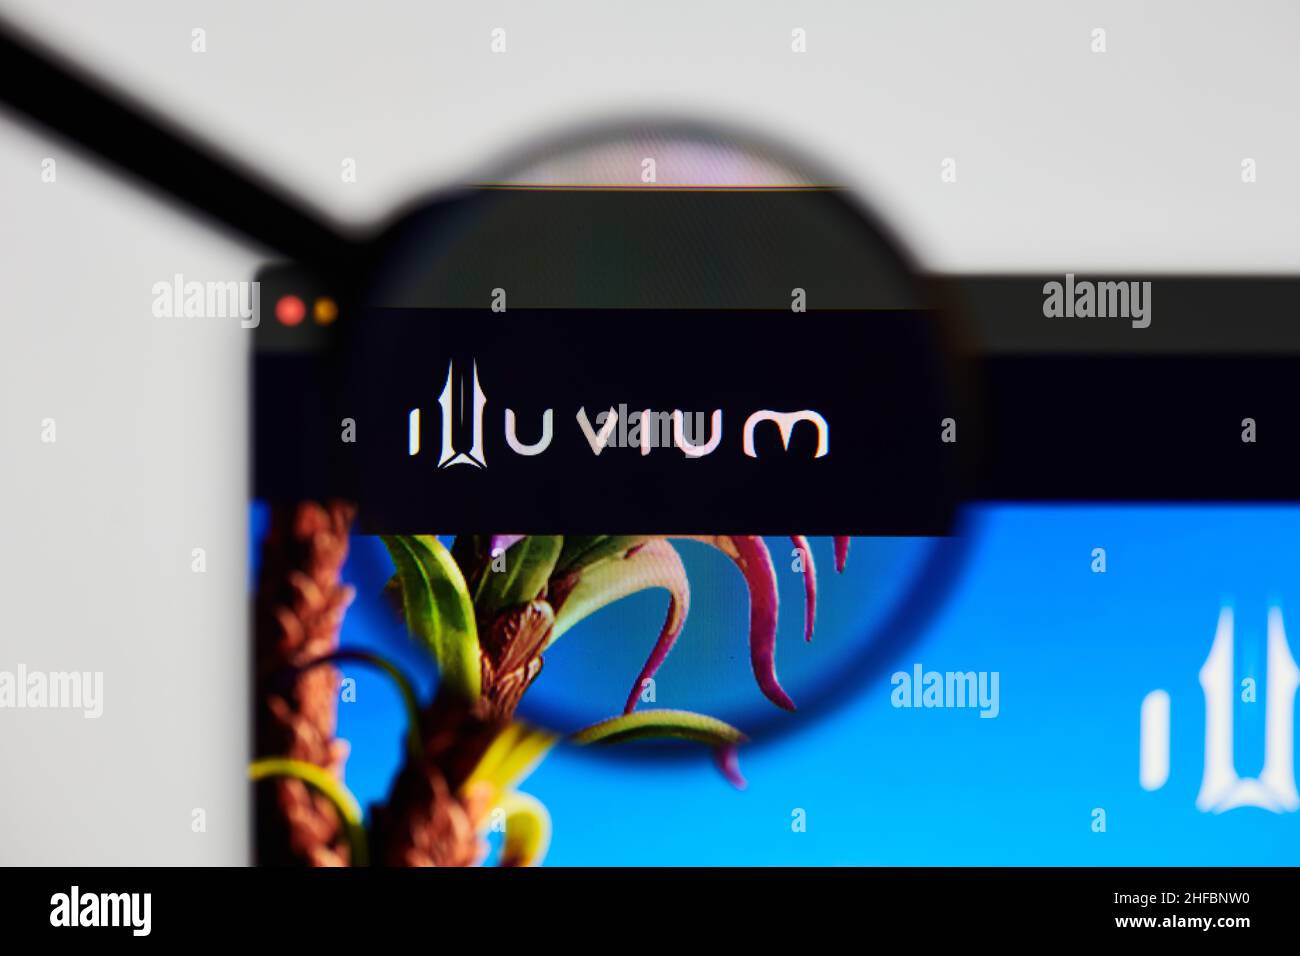 Milan, Italy - January 11, 2022: illuvium - ILV website's hp.  illuvium, ILV coin logo visible through a loope. Defi, ntf, cryptocurrency concepts ill Stock Photo